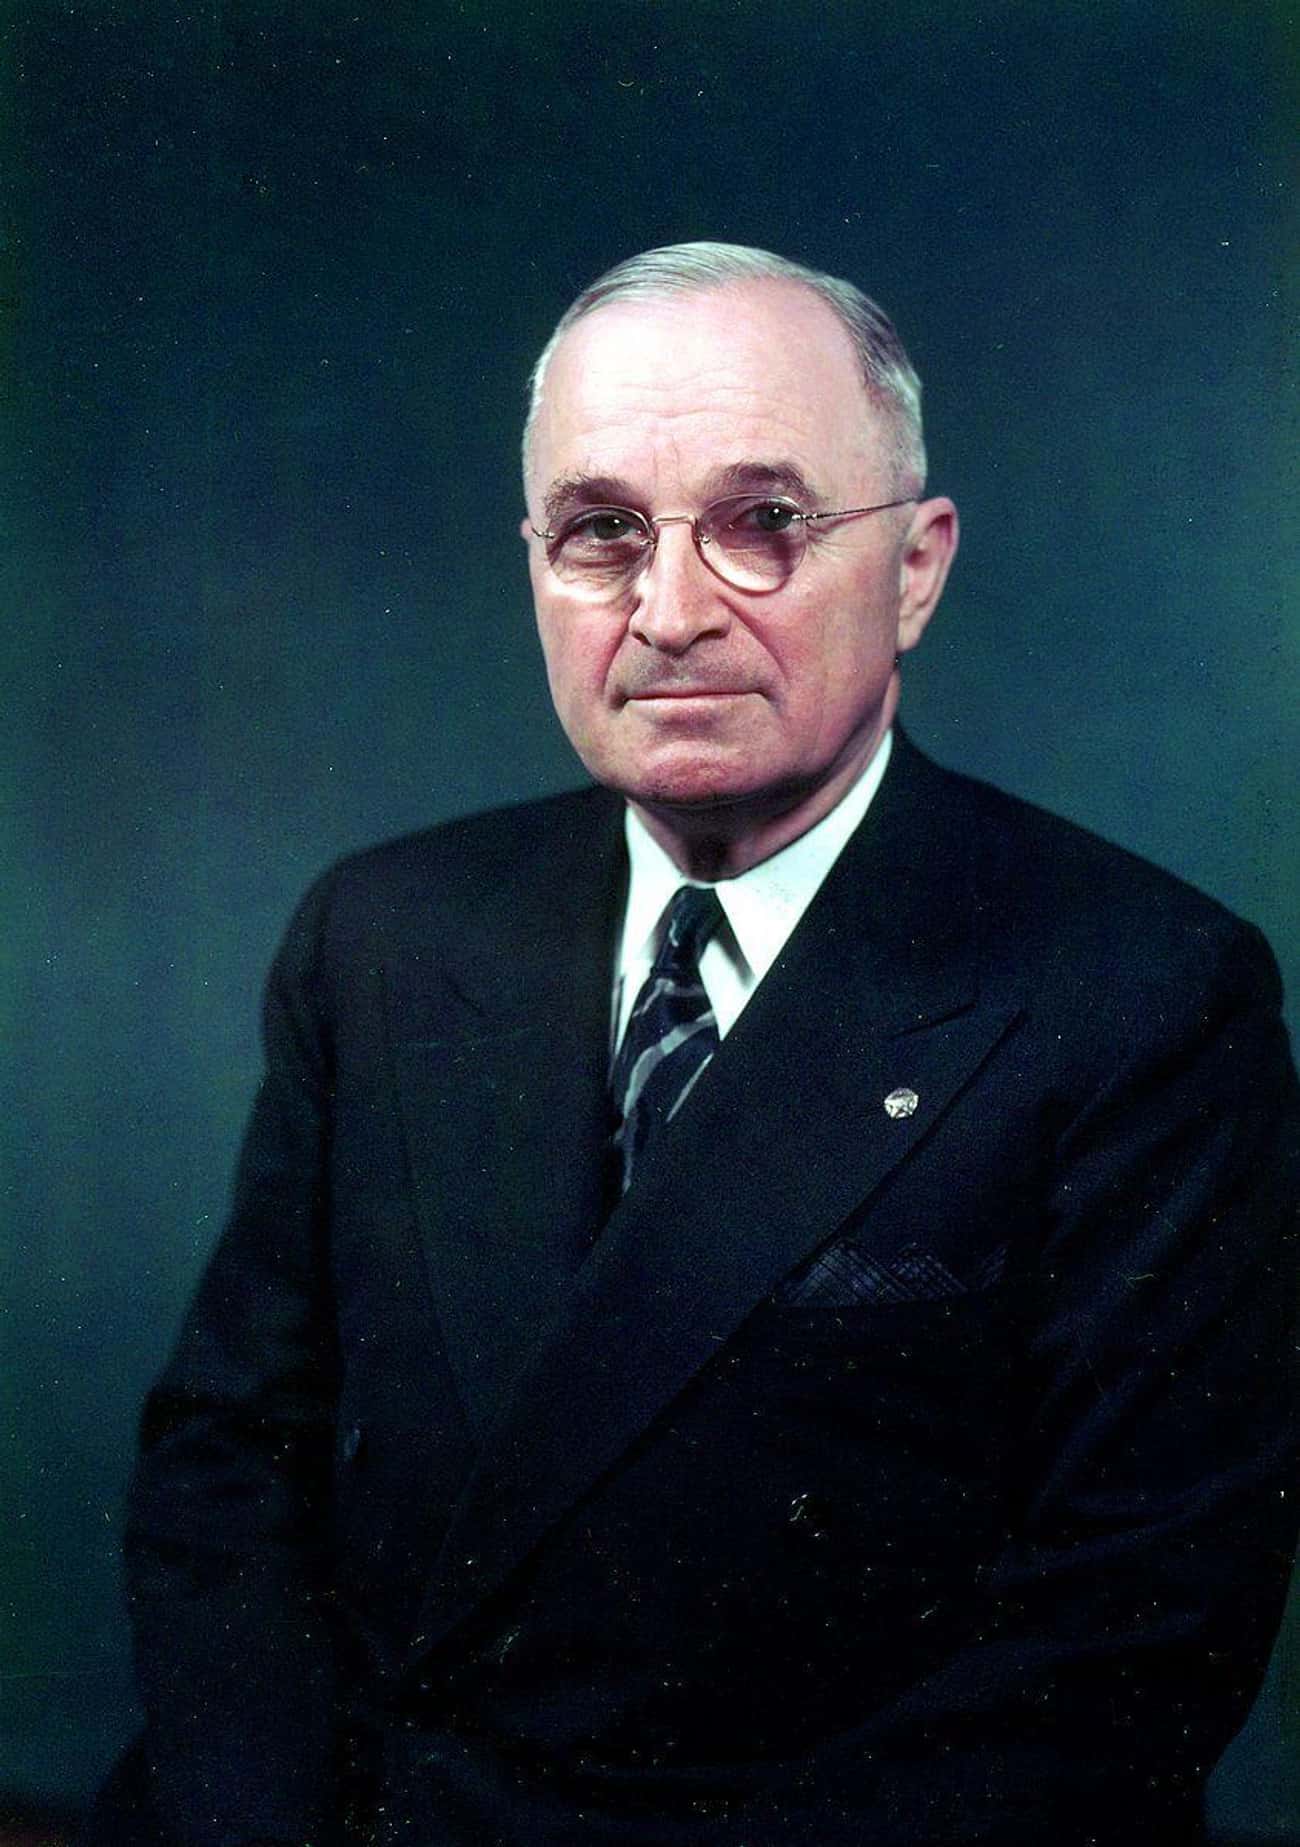 Harry Truman - His Mom’s Fried Chicken